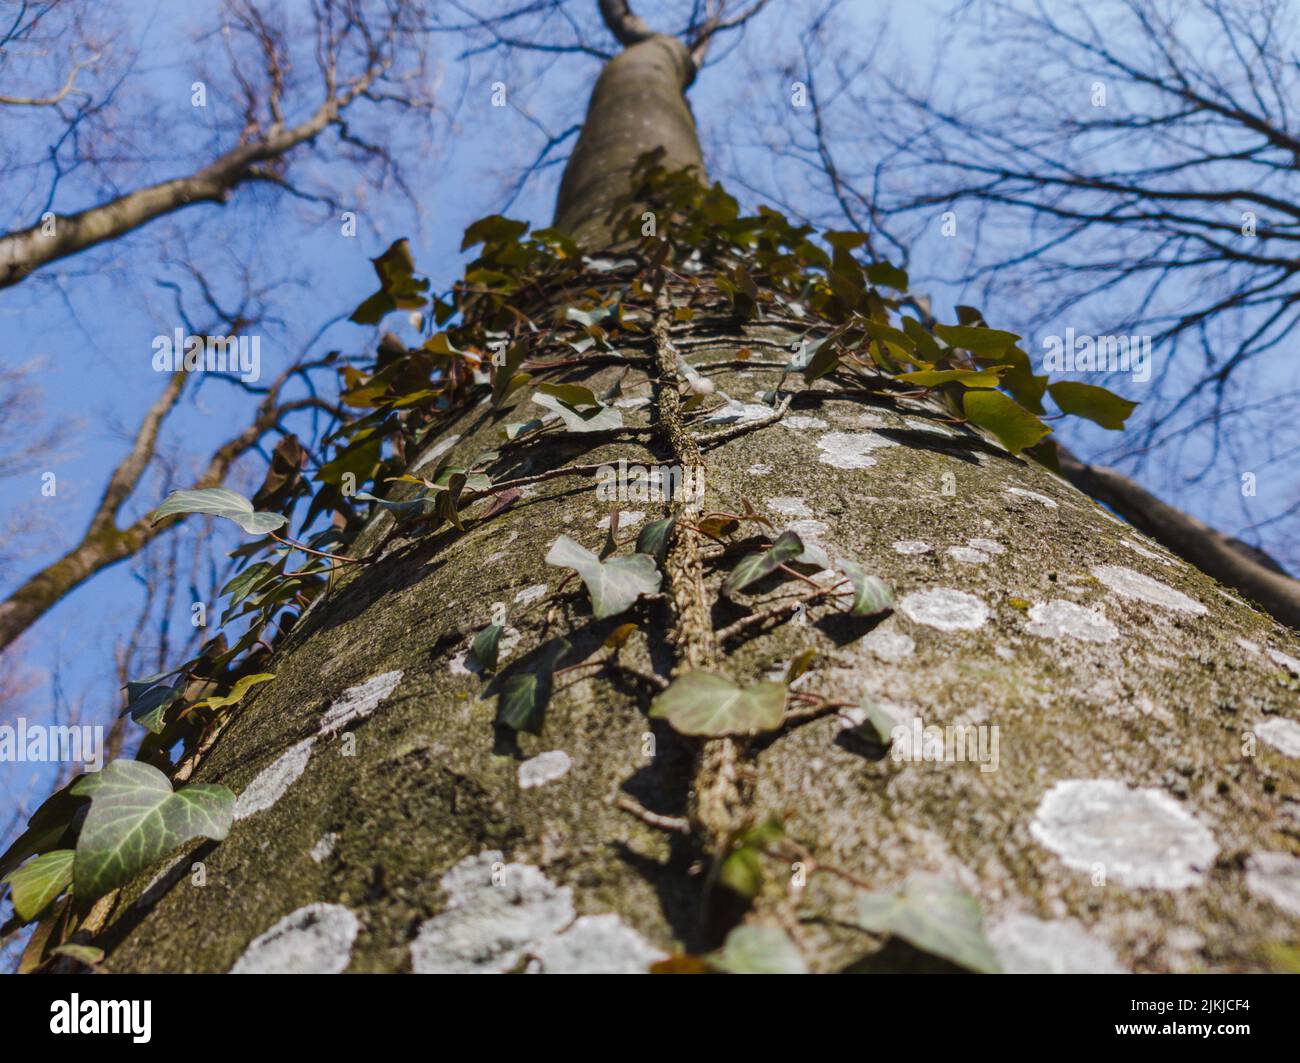 A low angle of ivy plant growing on a tree bark covered in lichen Stock Photo